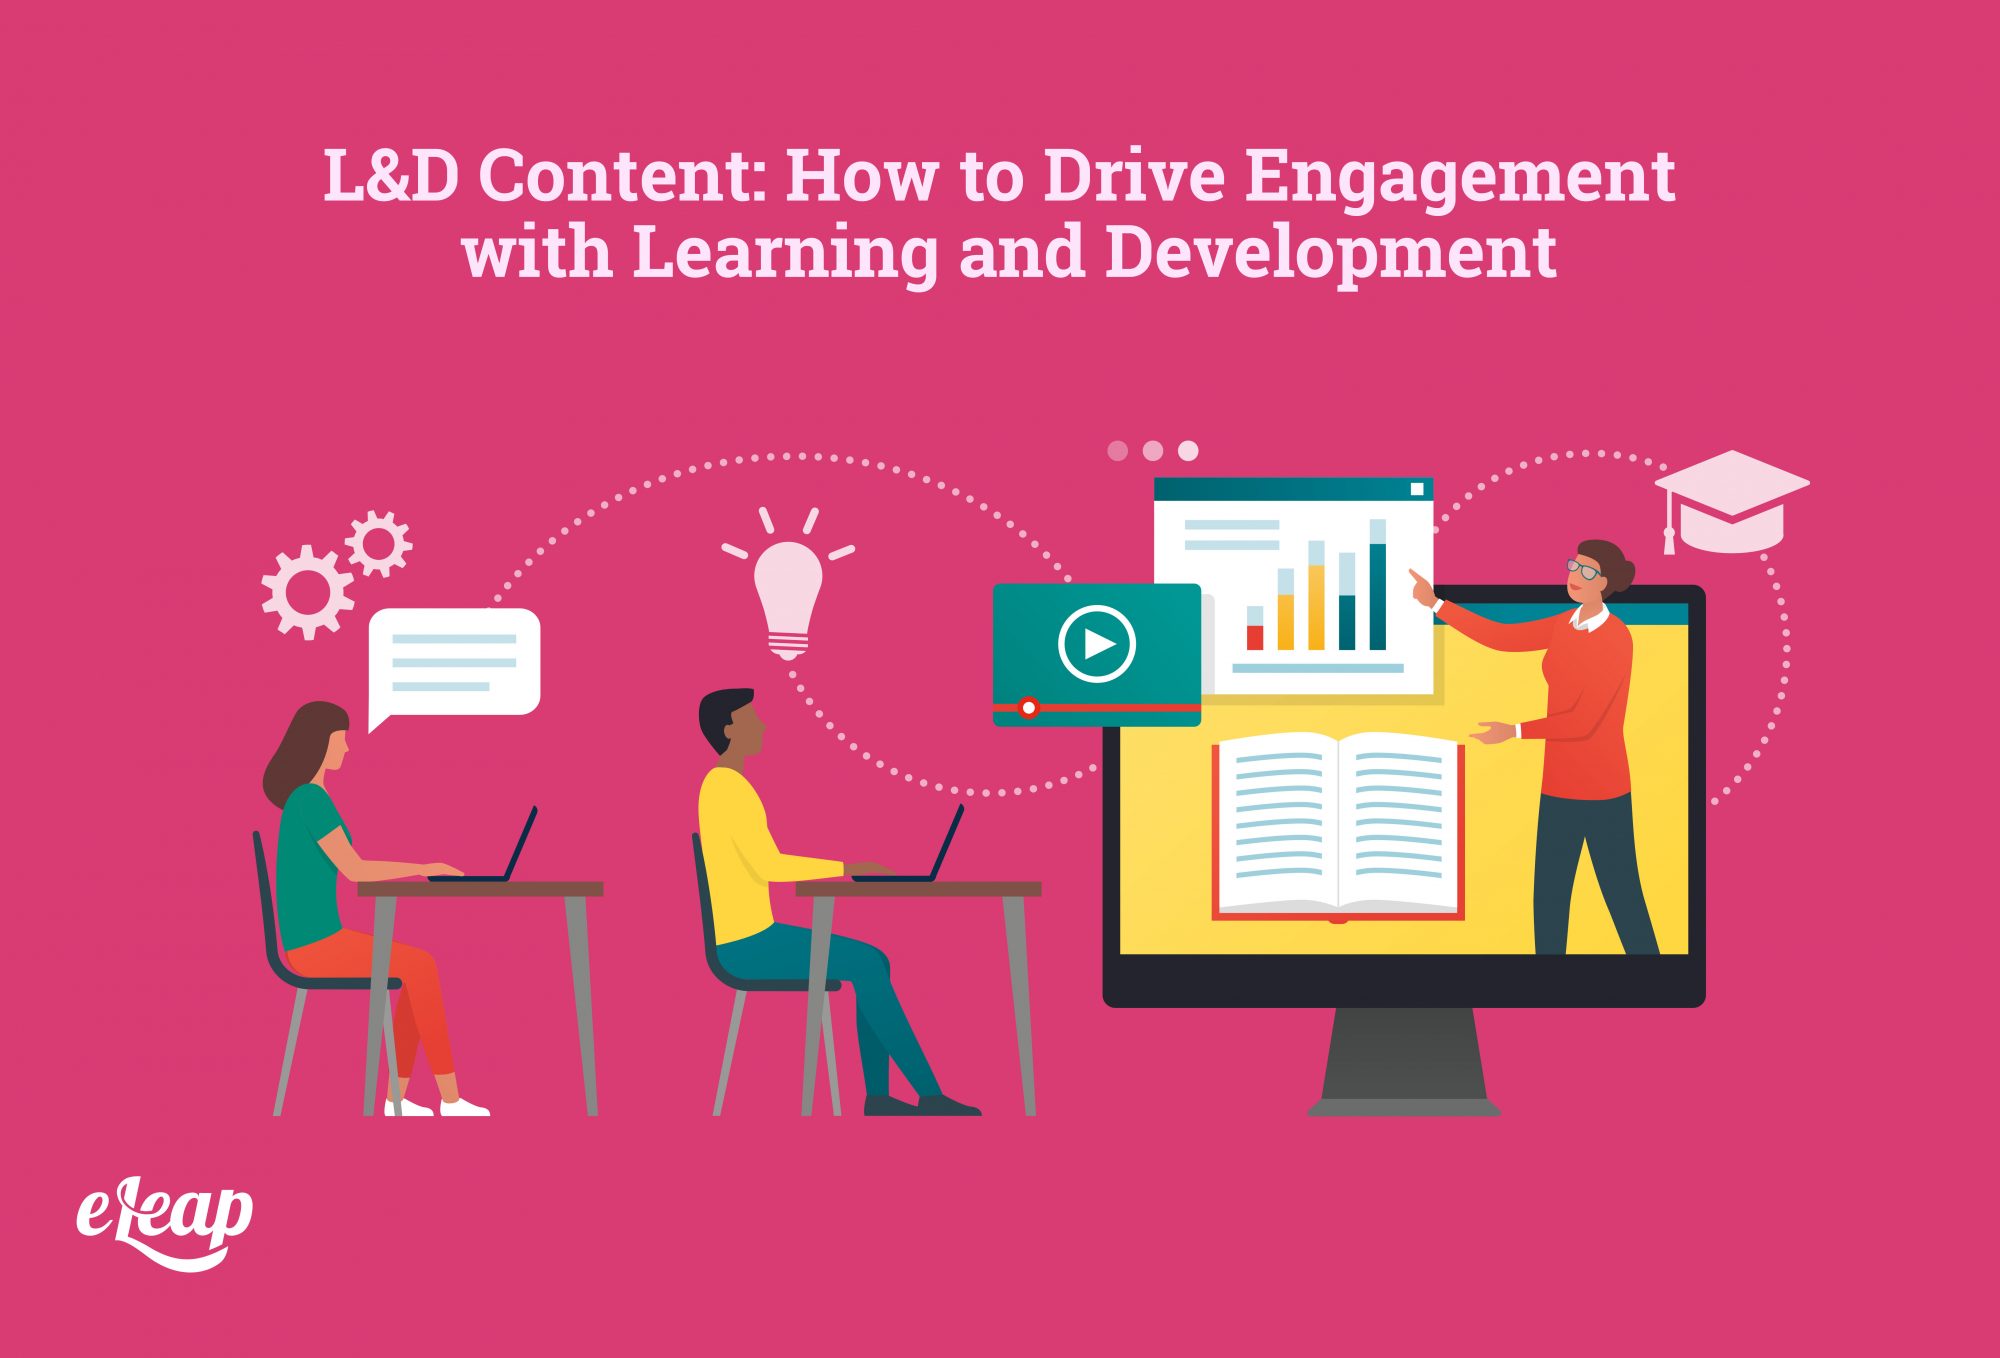 L&D Content: How to Drive Engagement with Learning and Development